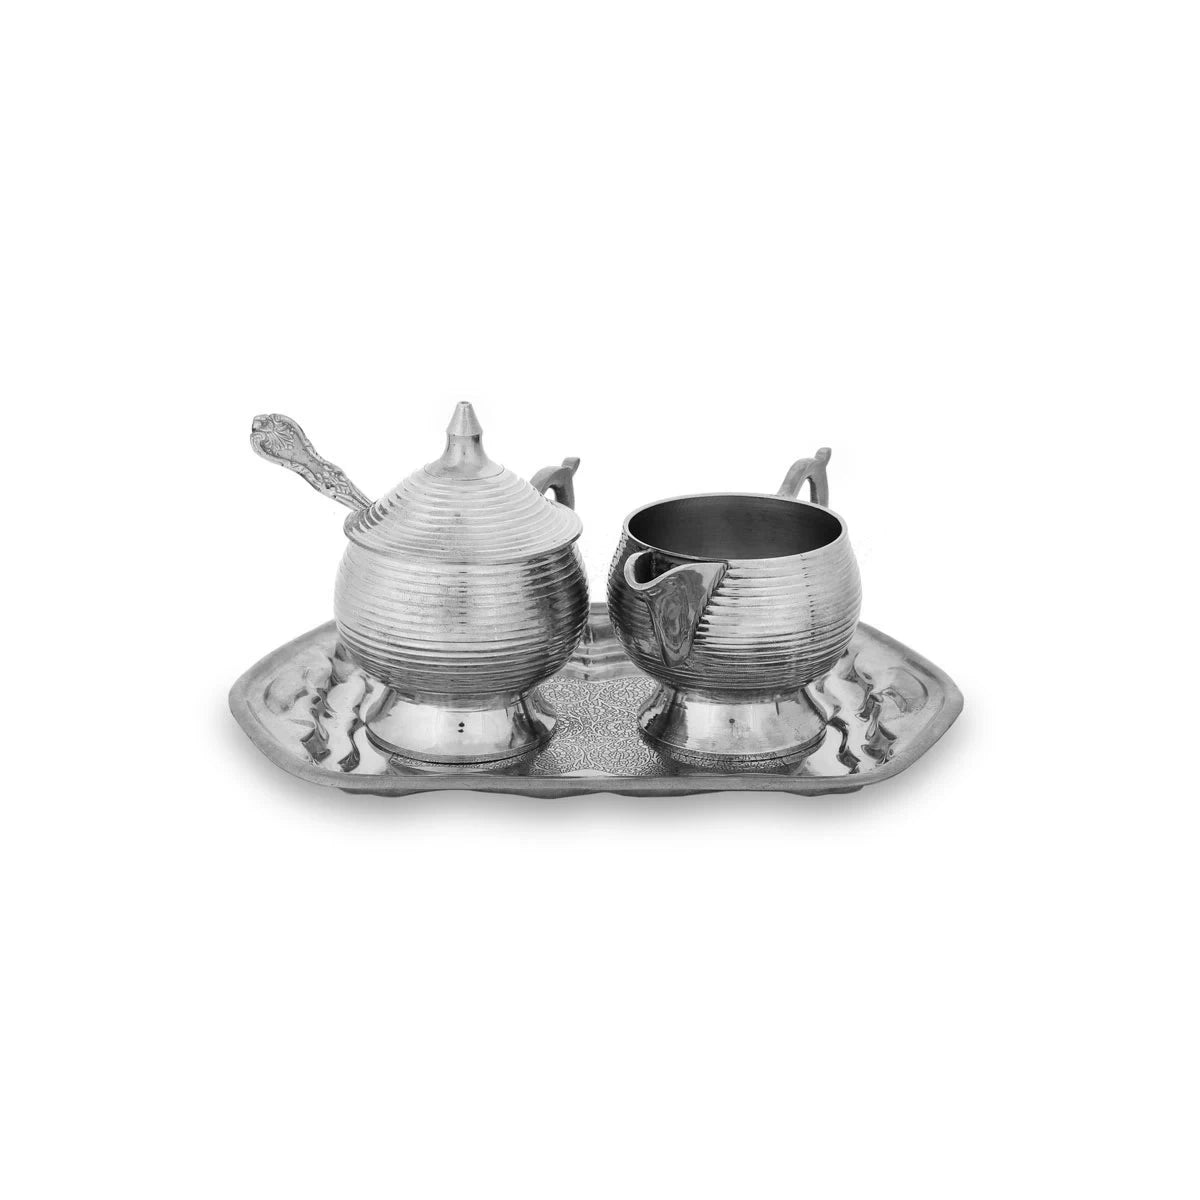 Front View of Shiny Silver Color Striped Brass Creamer Set - Showcasing Sugar Pot, Creamer Bowl, Spoon & Tray